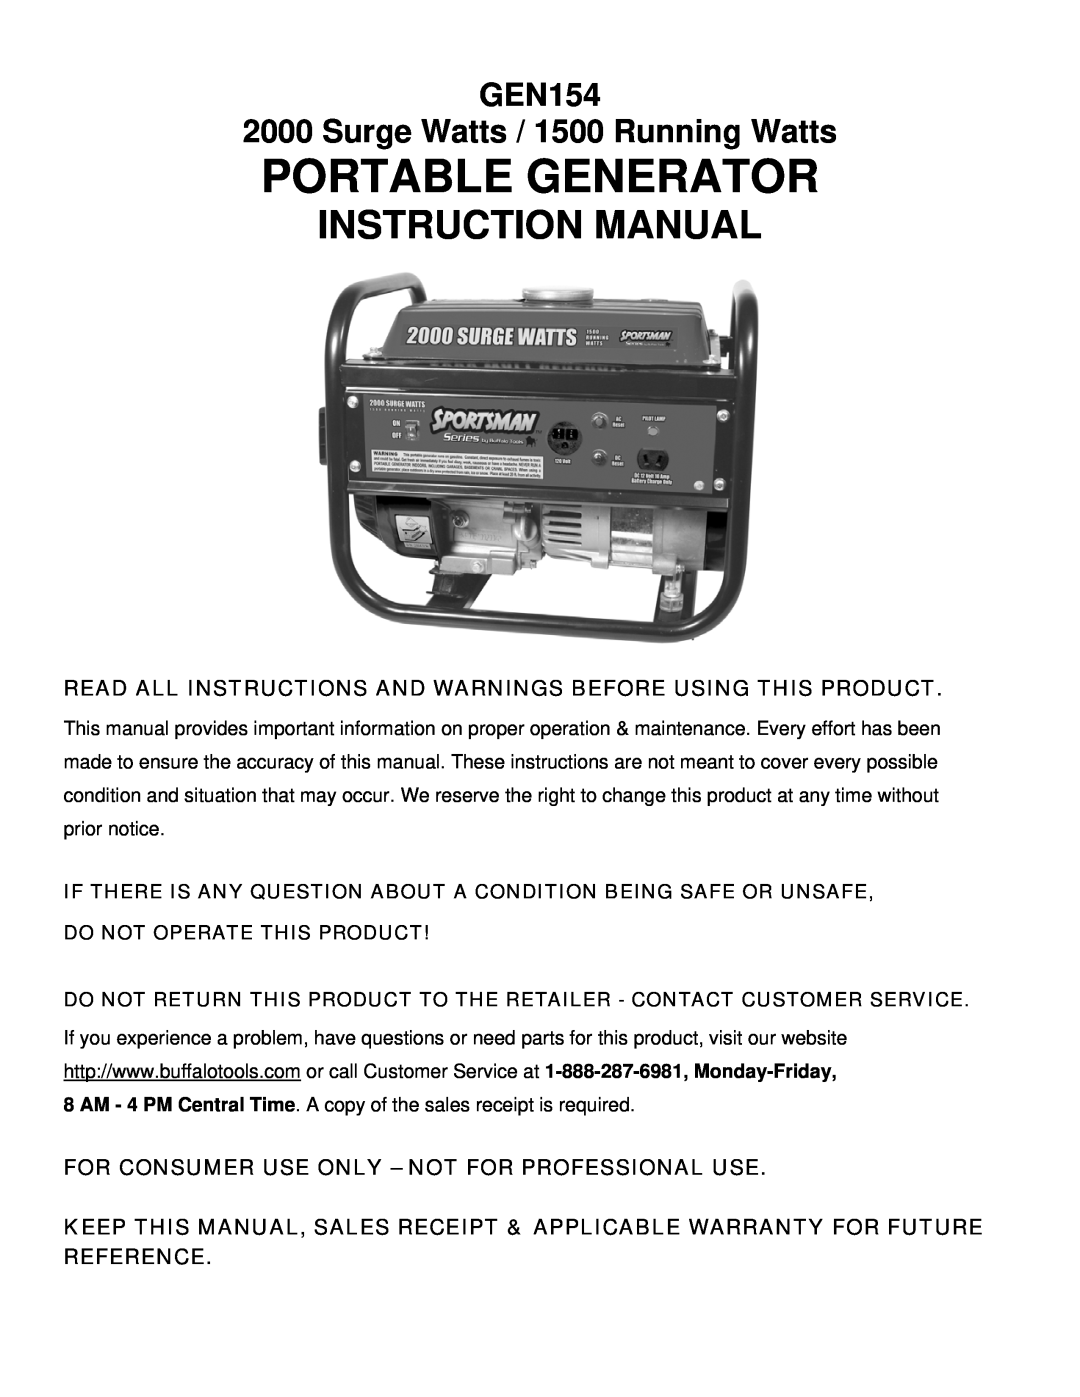 Buffalo Tools GEN154 instruction manual Read All Instructions And Warnings Before Using This Product, Portable Generator 